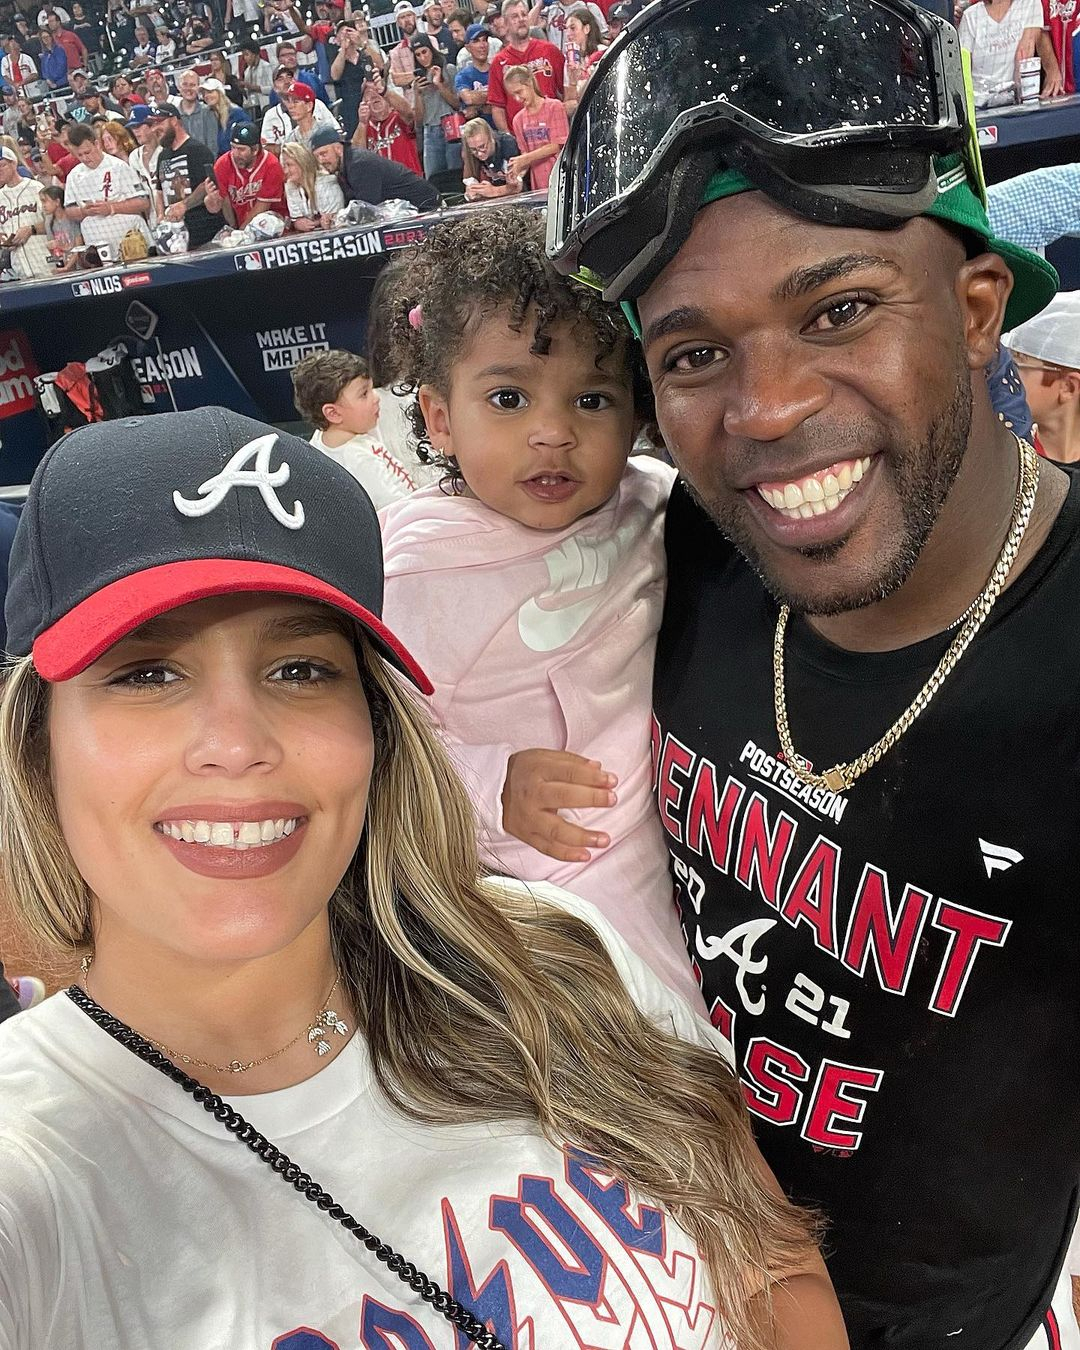 Meet the WAGs of the 2022 World Series cheering on the Astros and